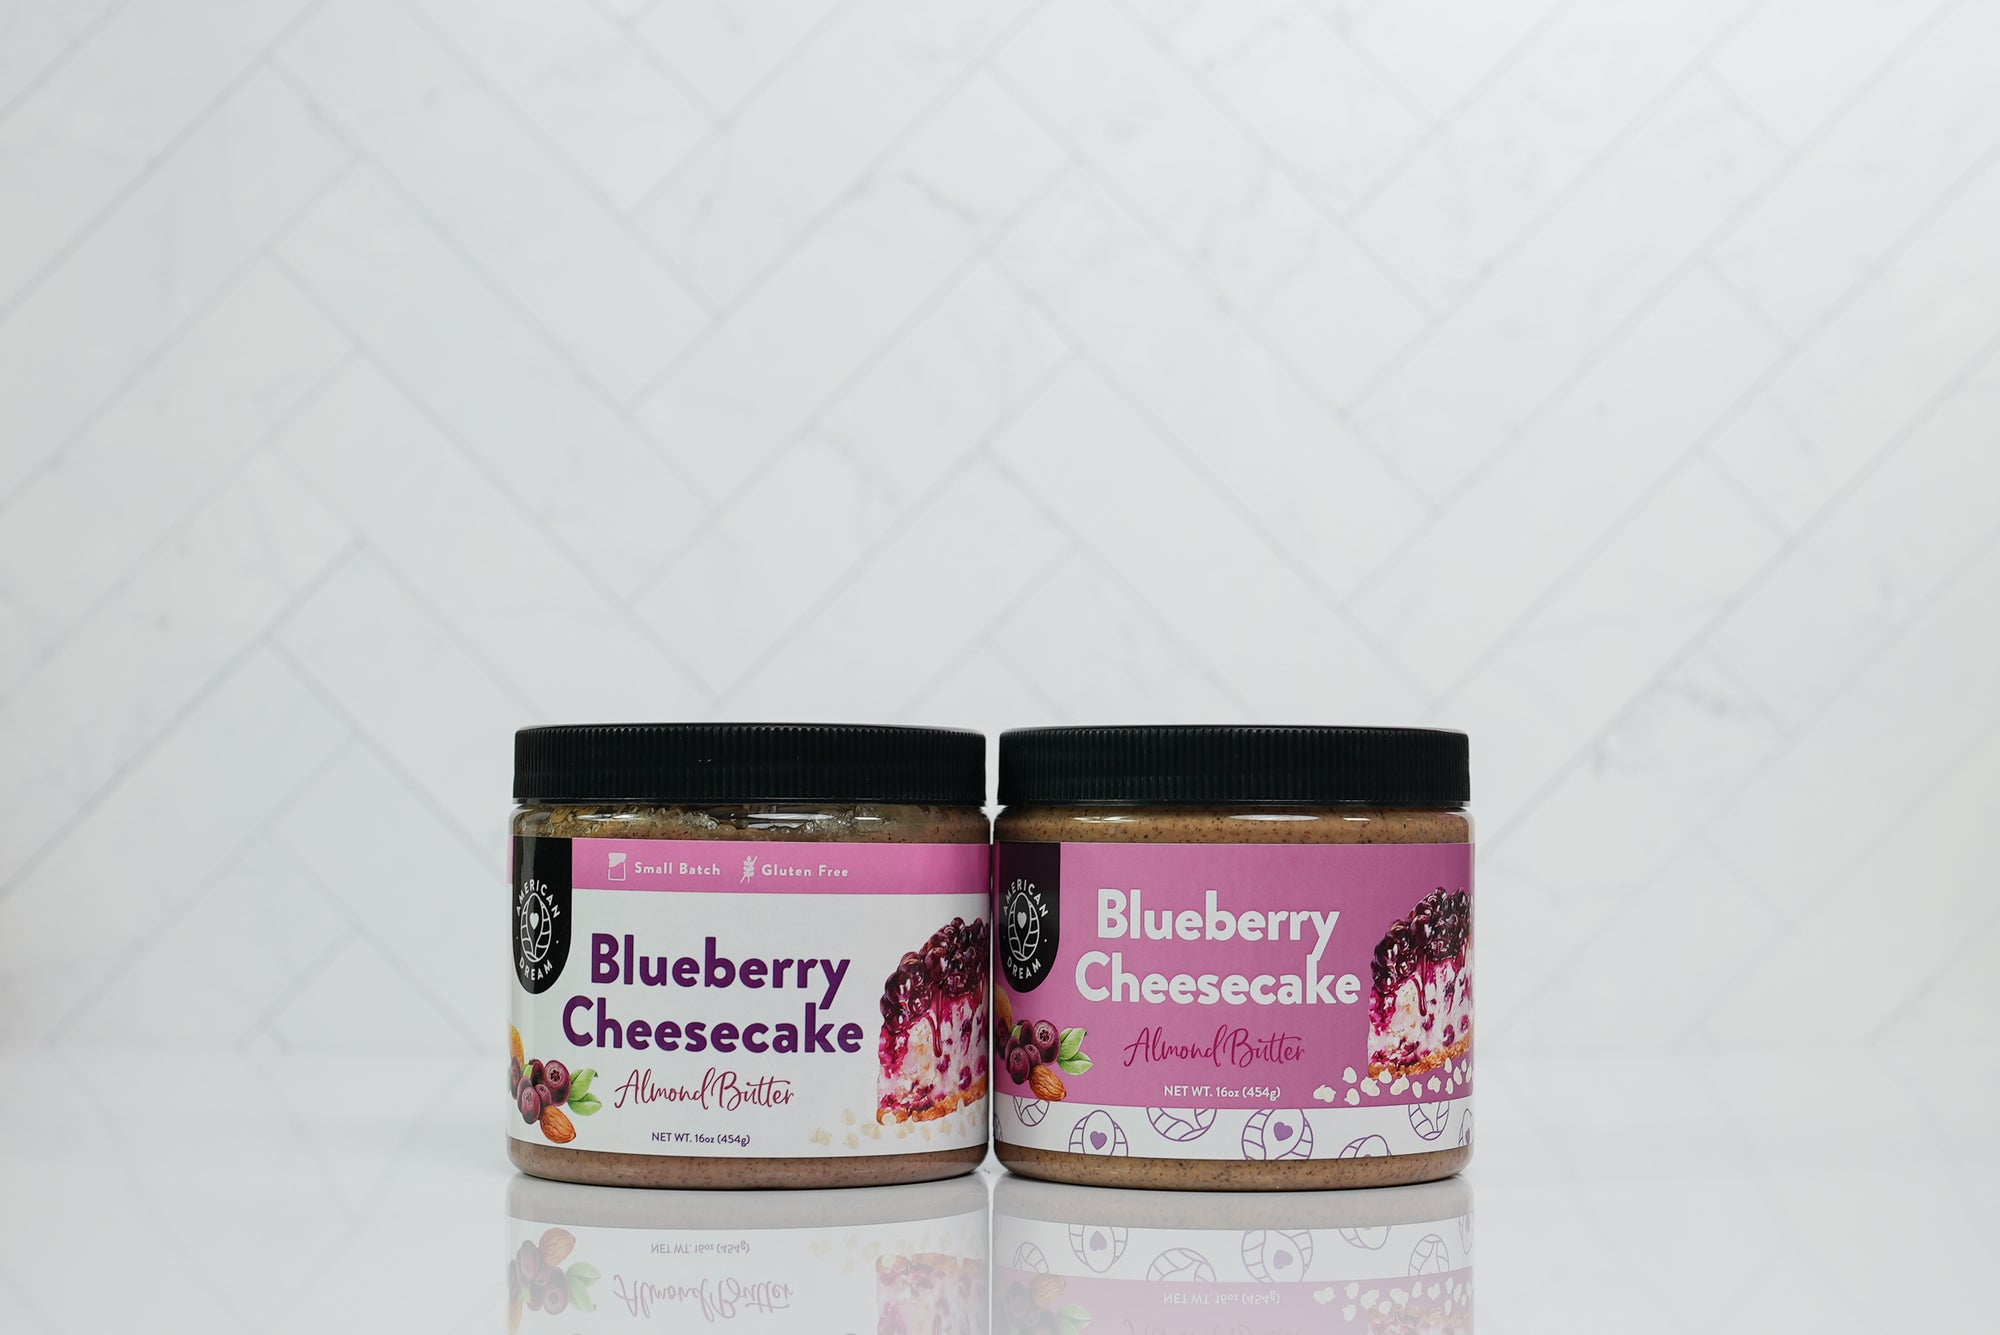 Introducing Non Gluten-Free Butters